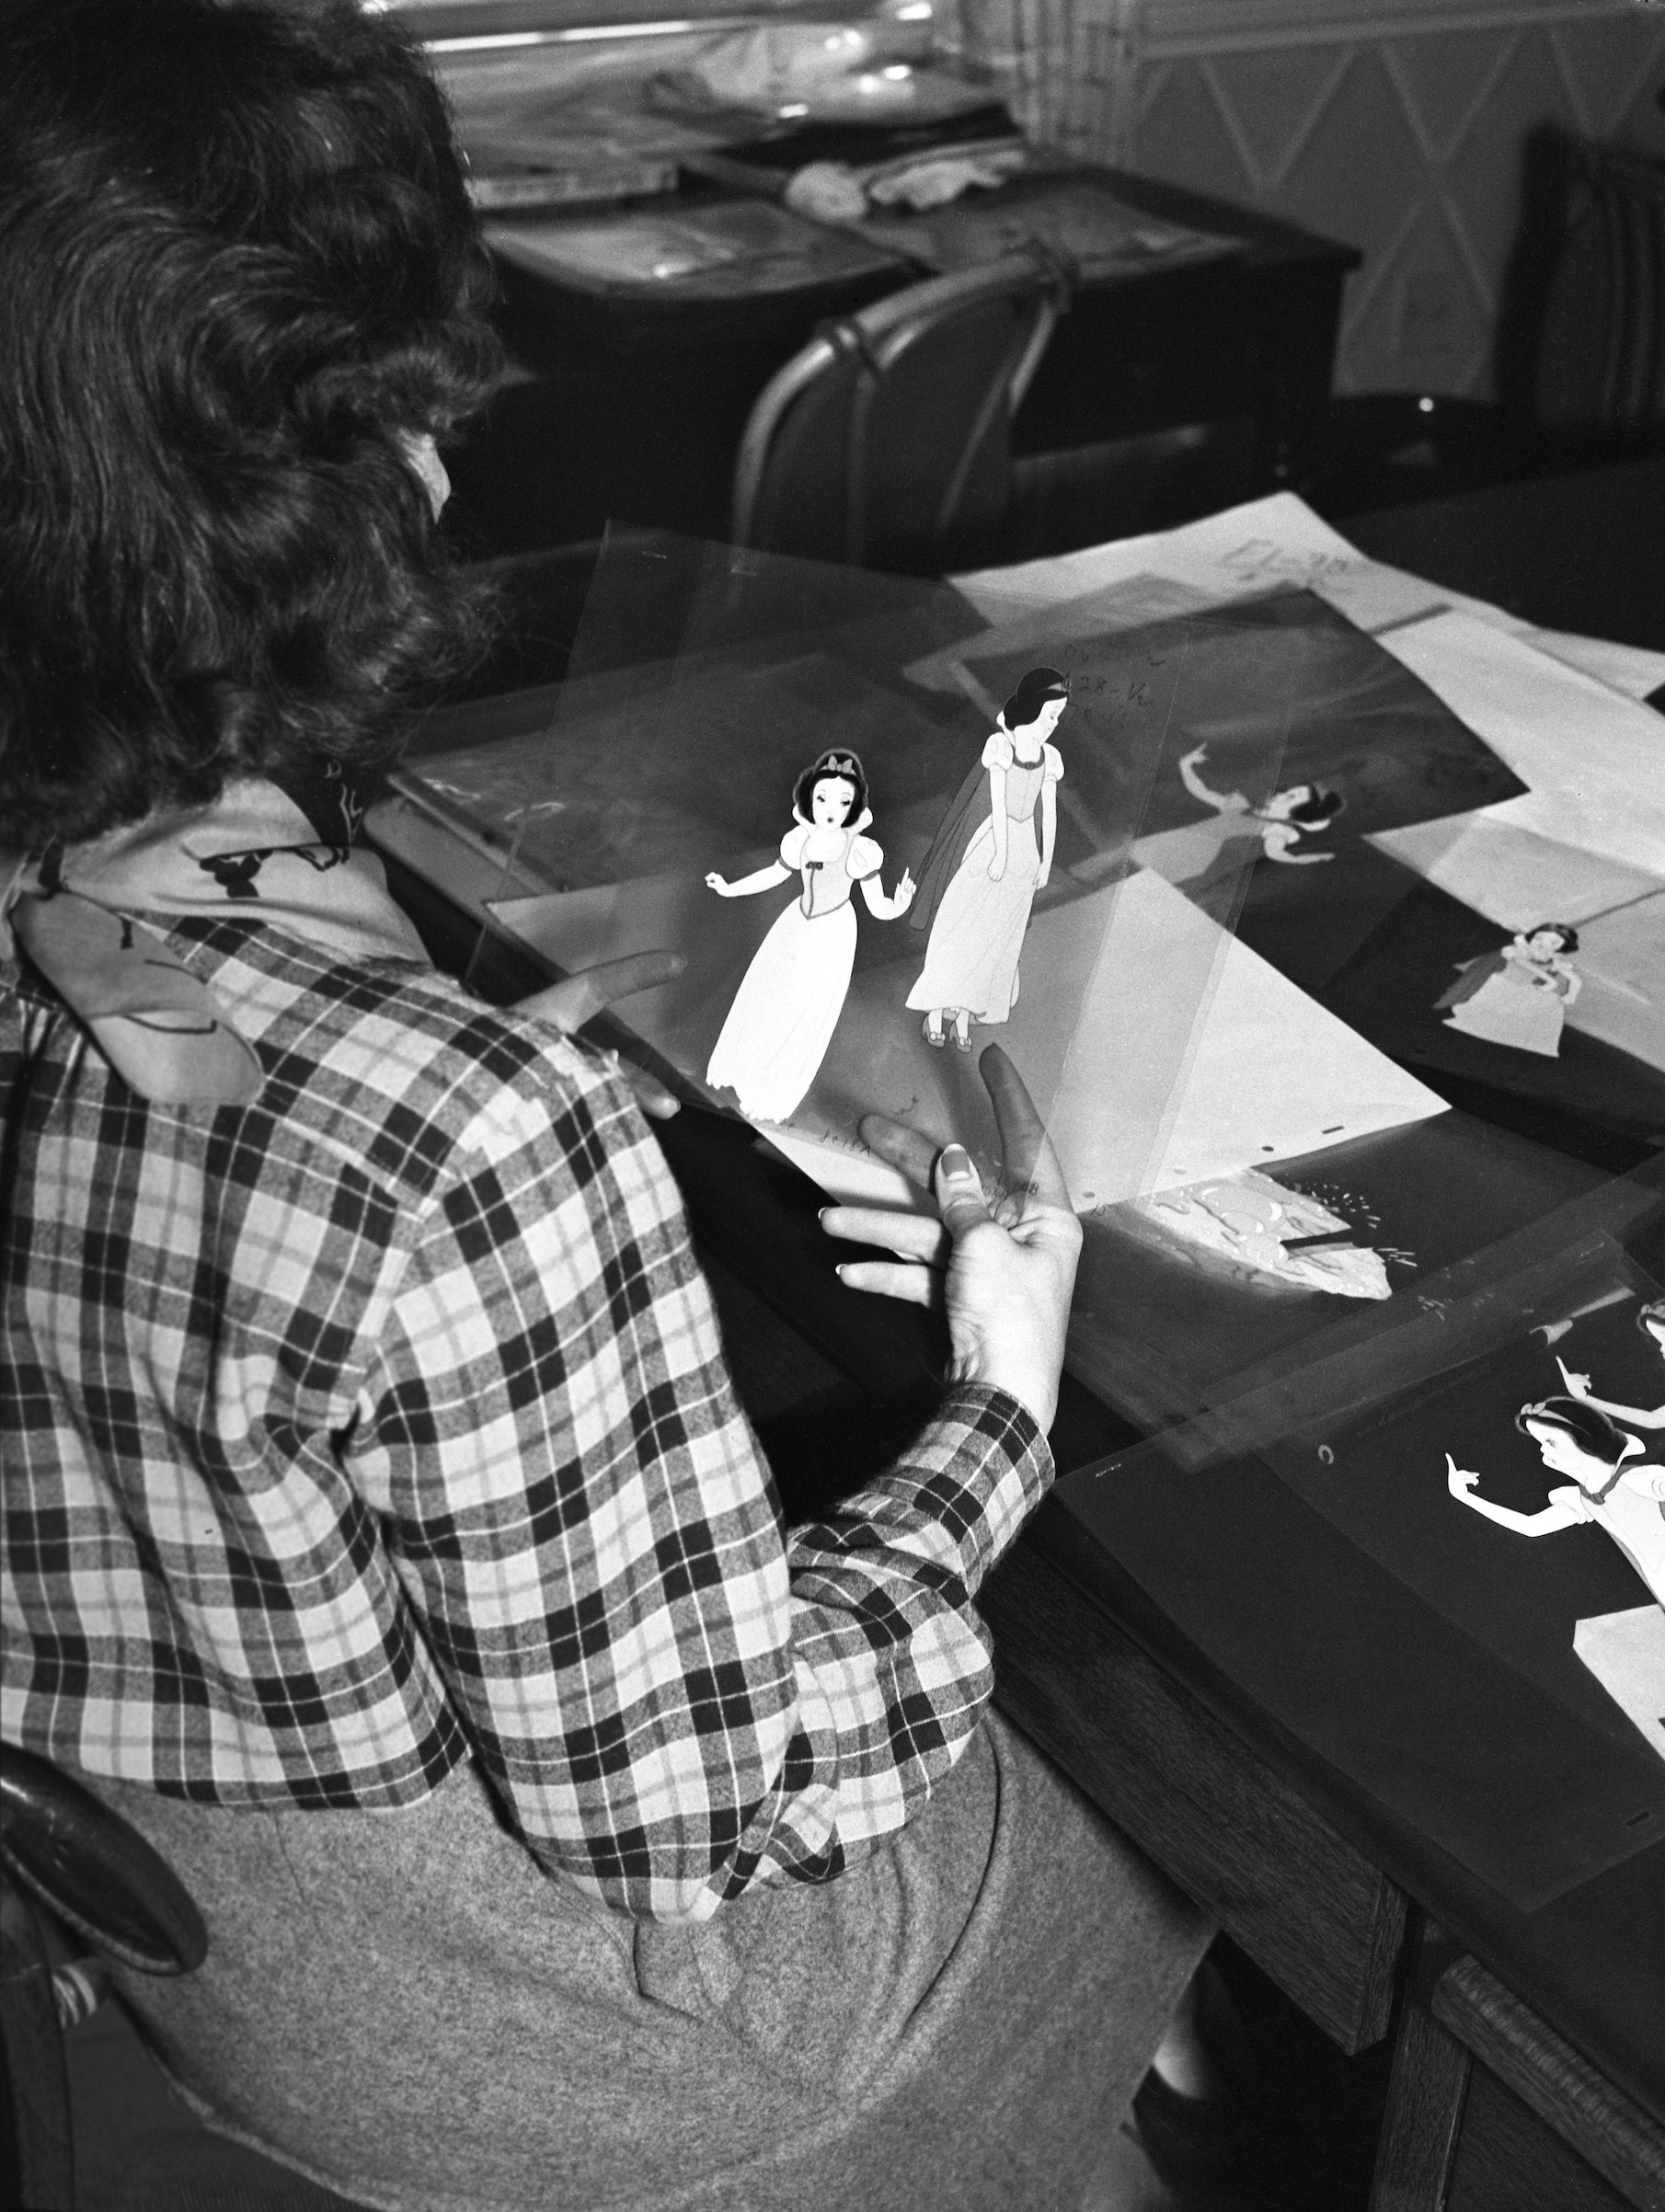 A Disney animator works on cells from the film 'Snow White' circa 1936 in Los Angeles, Calif. (Earl Theisen Collection—Getty Images)